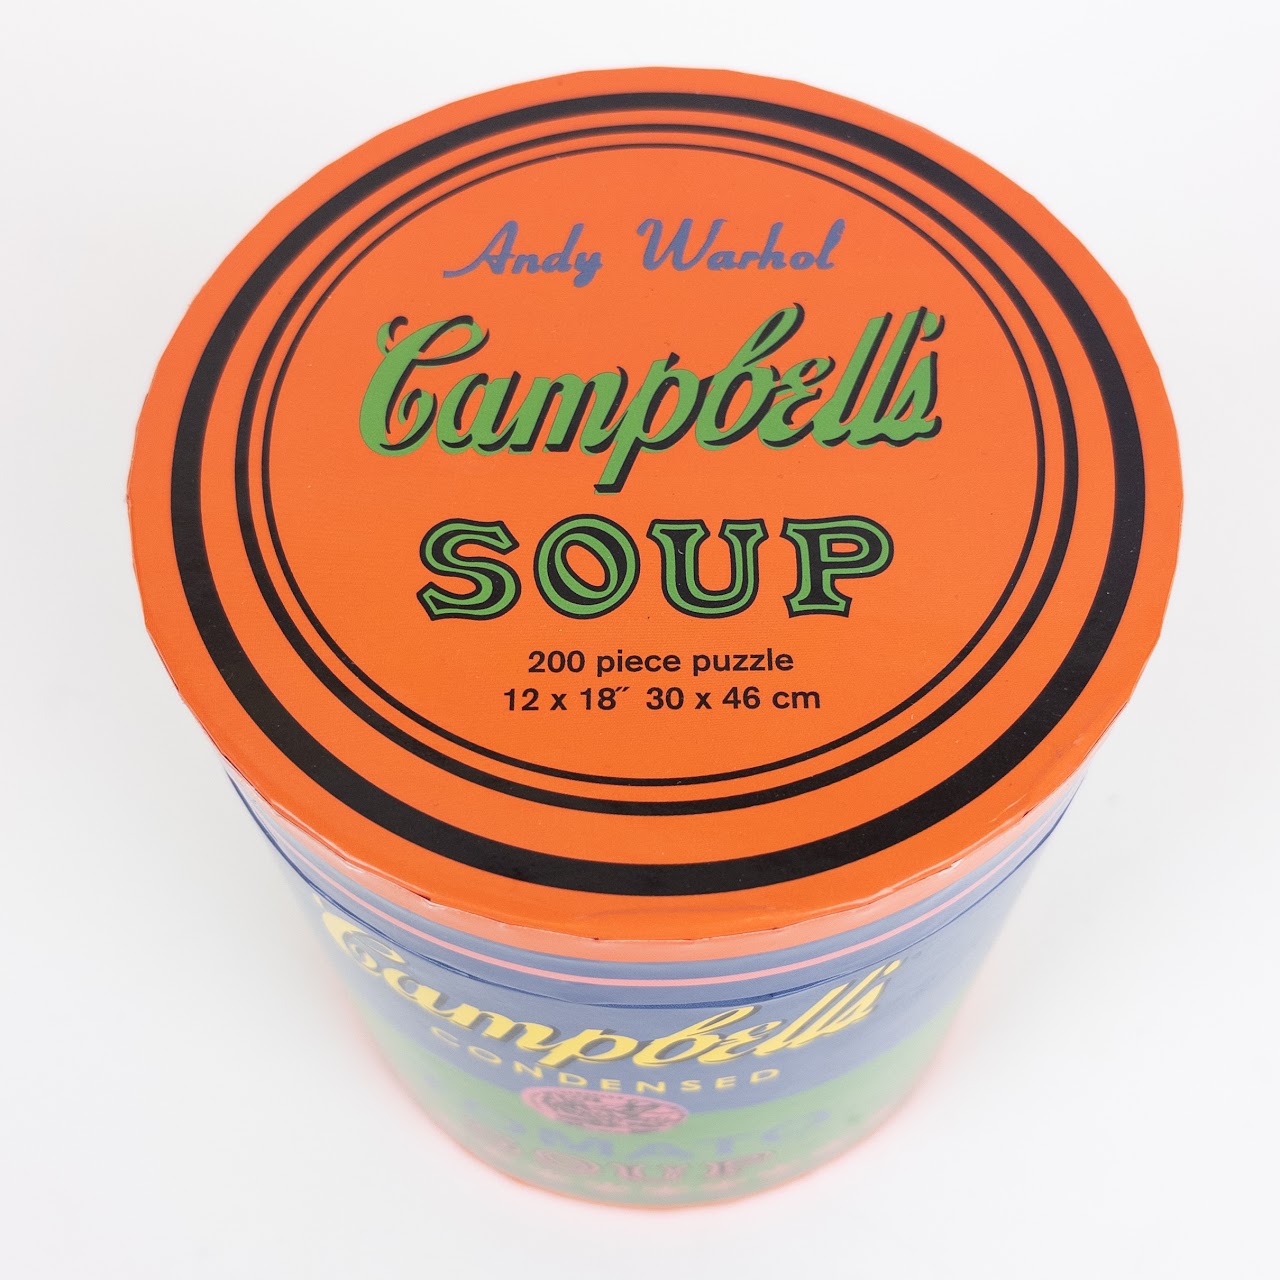 Andy Warhol Campbell's Soup 200 Puzzle